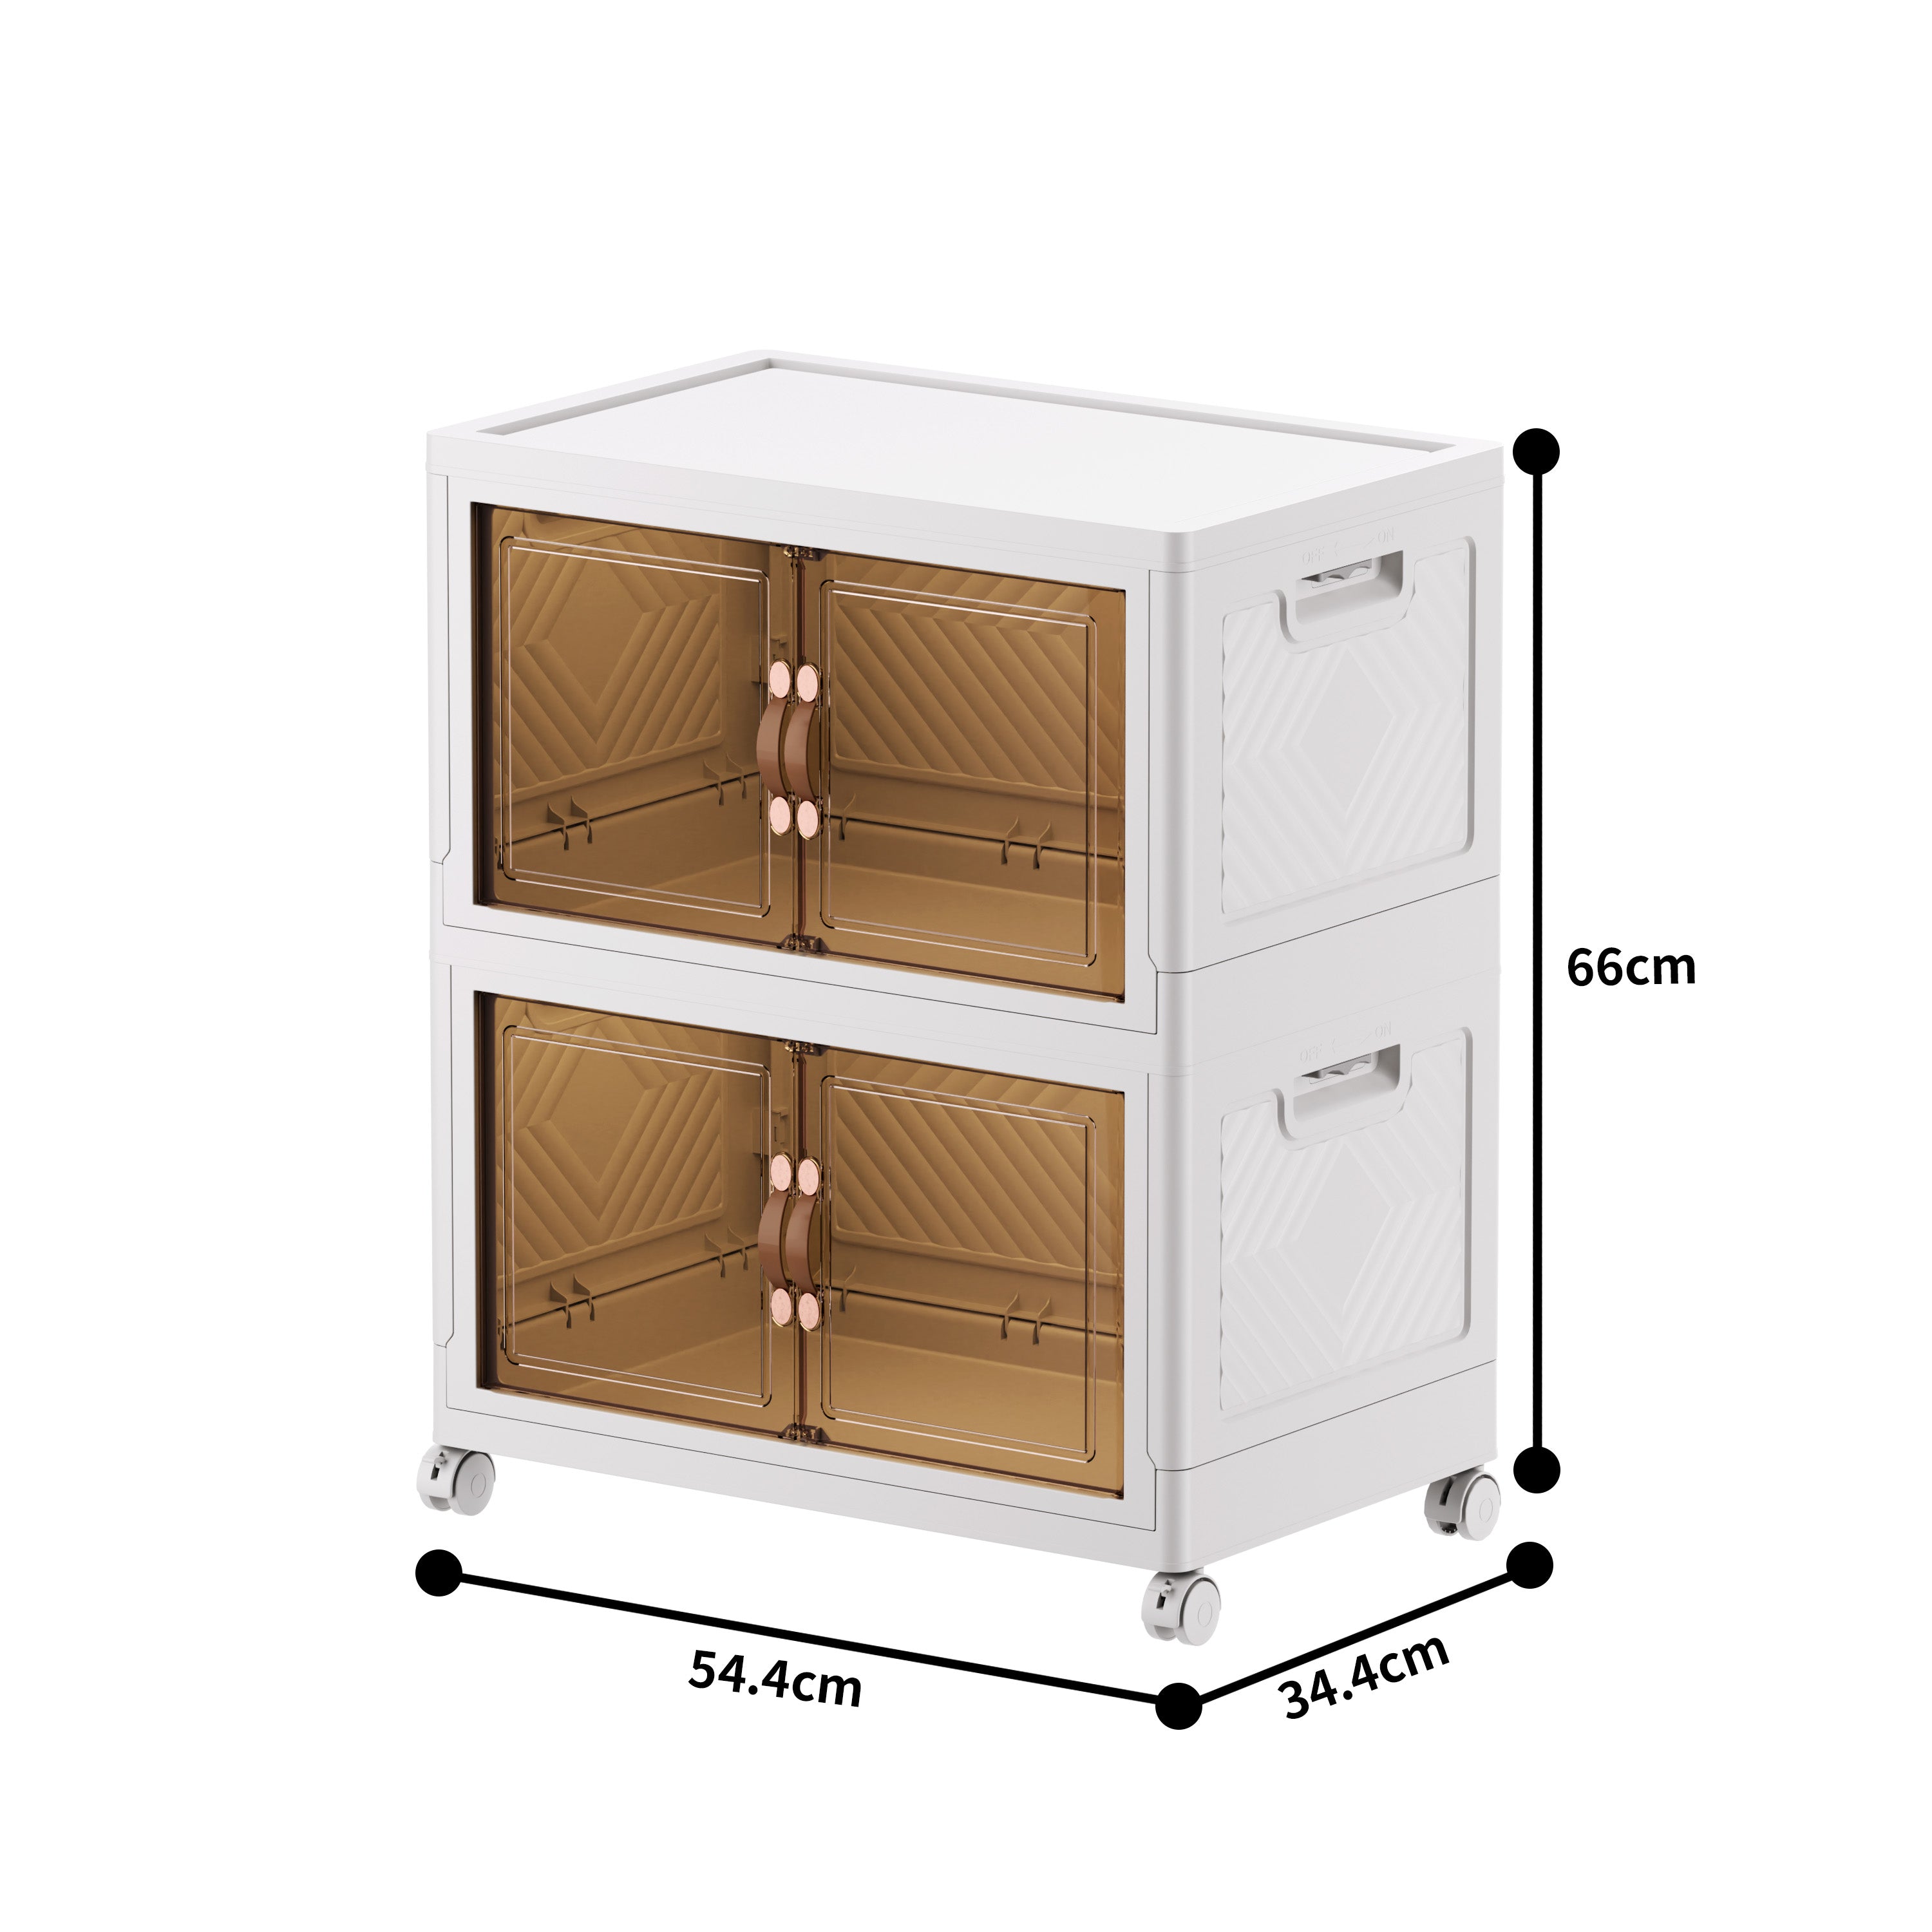 【KSA STOCK】Foldable plastic storage box with wheels and doors and two shelves, medium size 66*55cm NK007